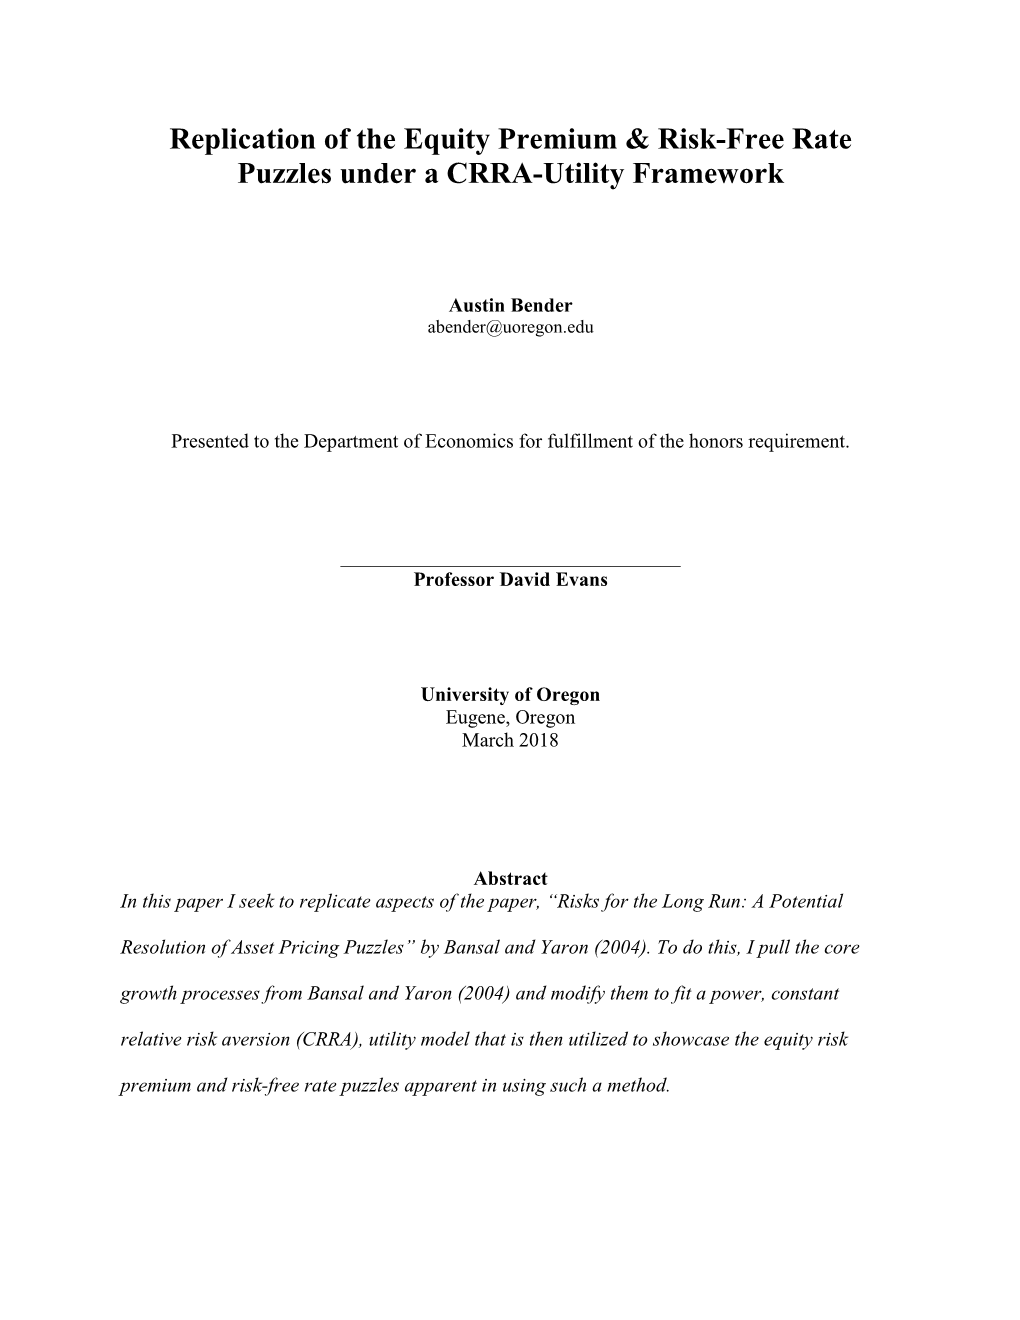 Replication of the Equity Premium & Risk-Free Rate Puzzles Under a CRRA-Utility Framework